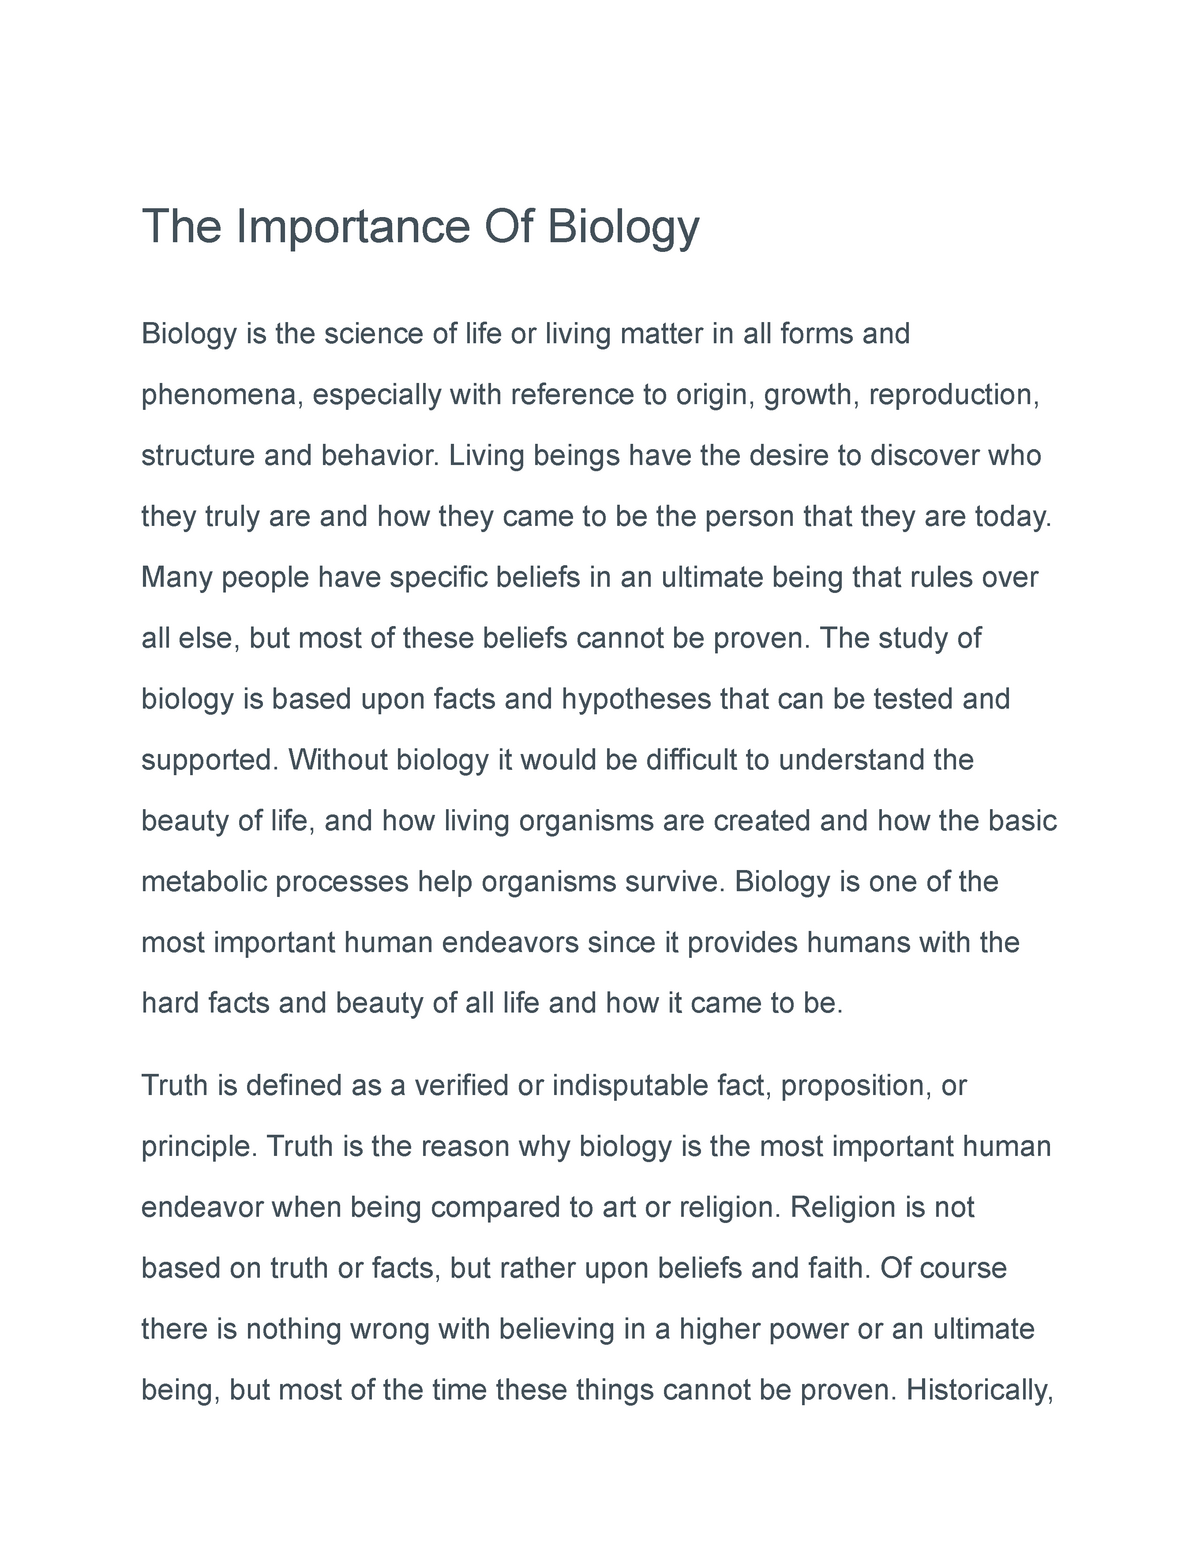 essay on why biology is important